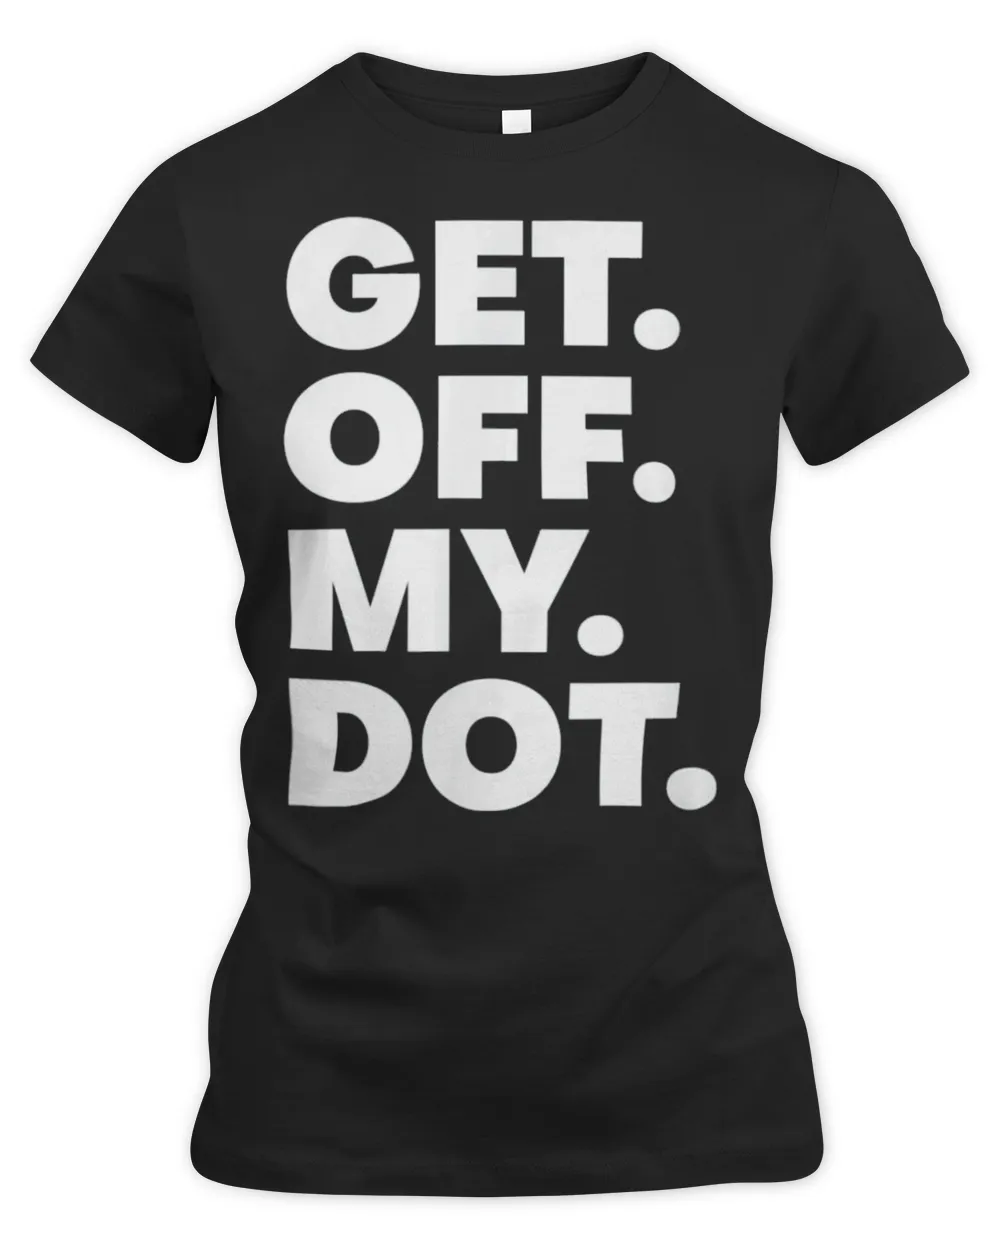 Get Off My Dot Marching Band Practice Color Guard Gear T-Shirt